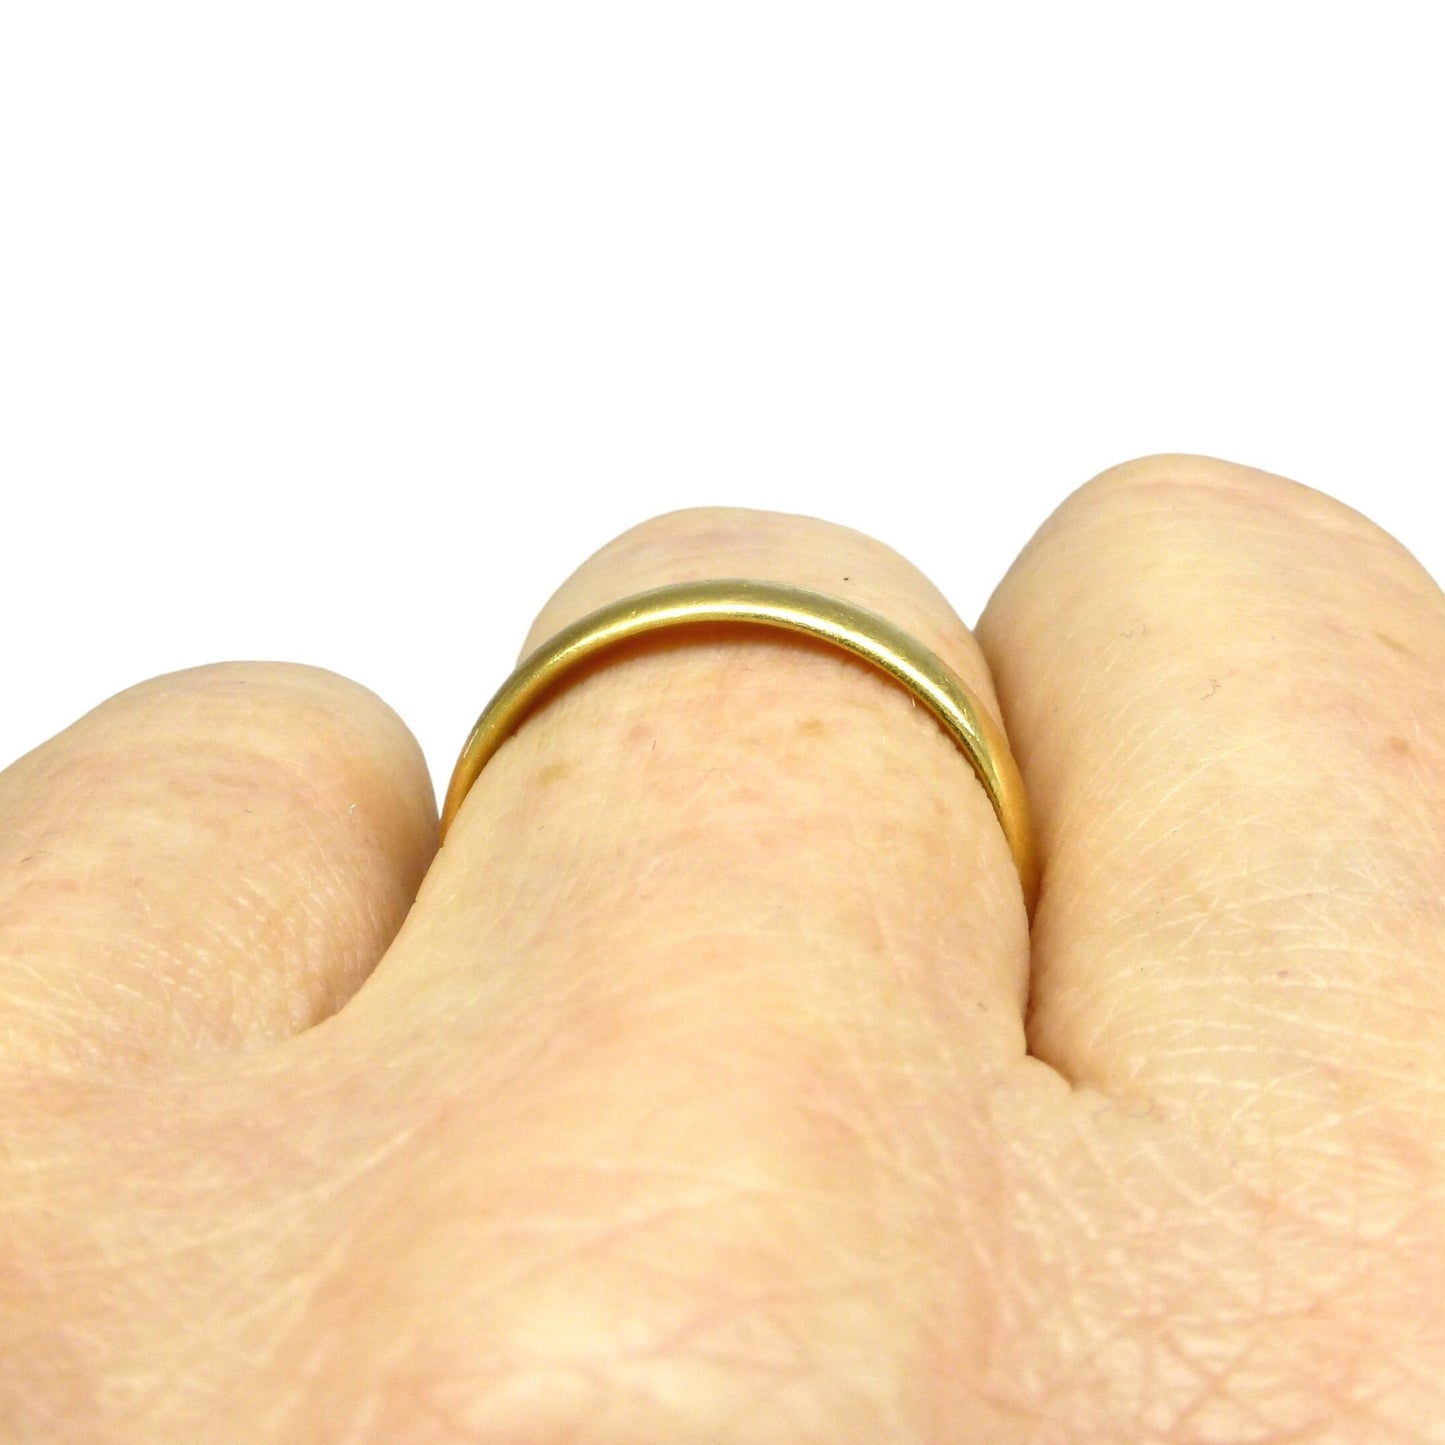 Antique Art Deco English 22ct gold wedding band dated 1928 ~ Yellow gold stacking ring 4.18 grams